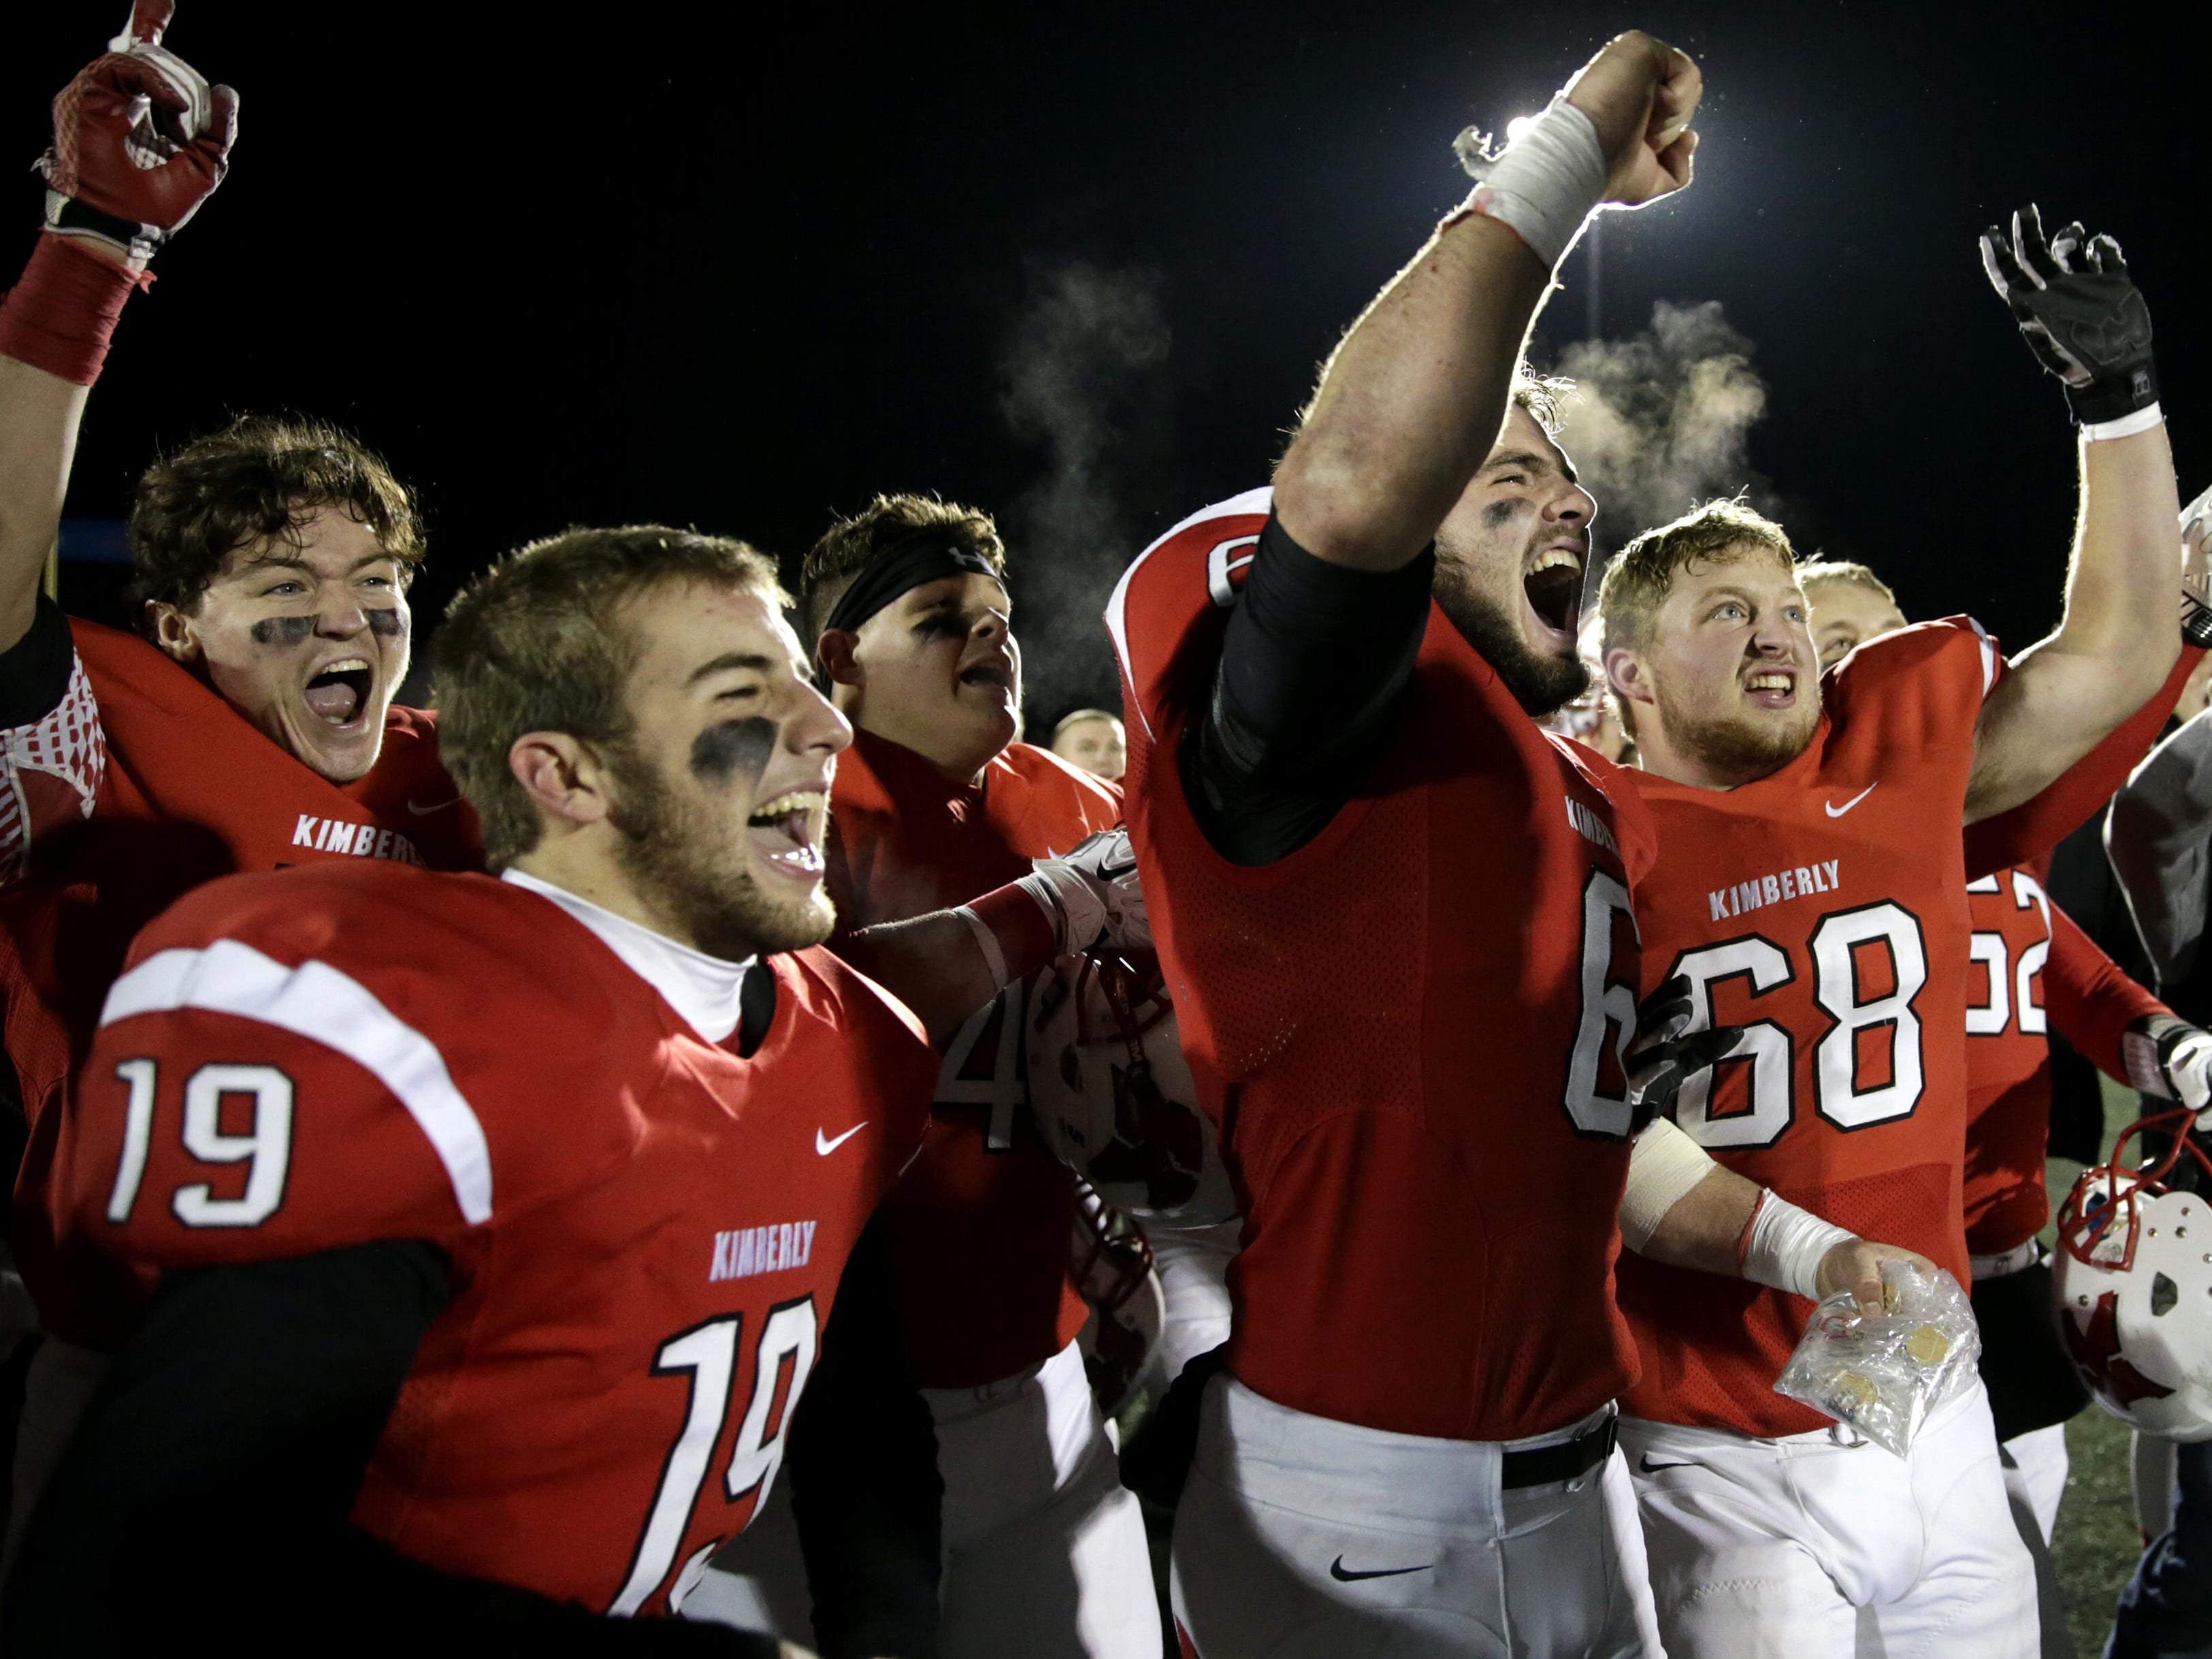 Kimberly players including Nathan Janssen (19), Blair Mulholland (6) and Mickey Steger (68) celebrate after the Papermakers’ 49-20 win over Marquette Friday in a WIAA Division 1 state semifinal at Titan Stadium in Oshkosh.